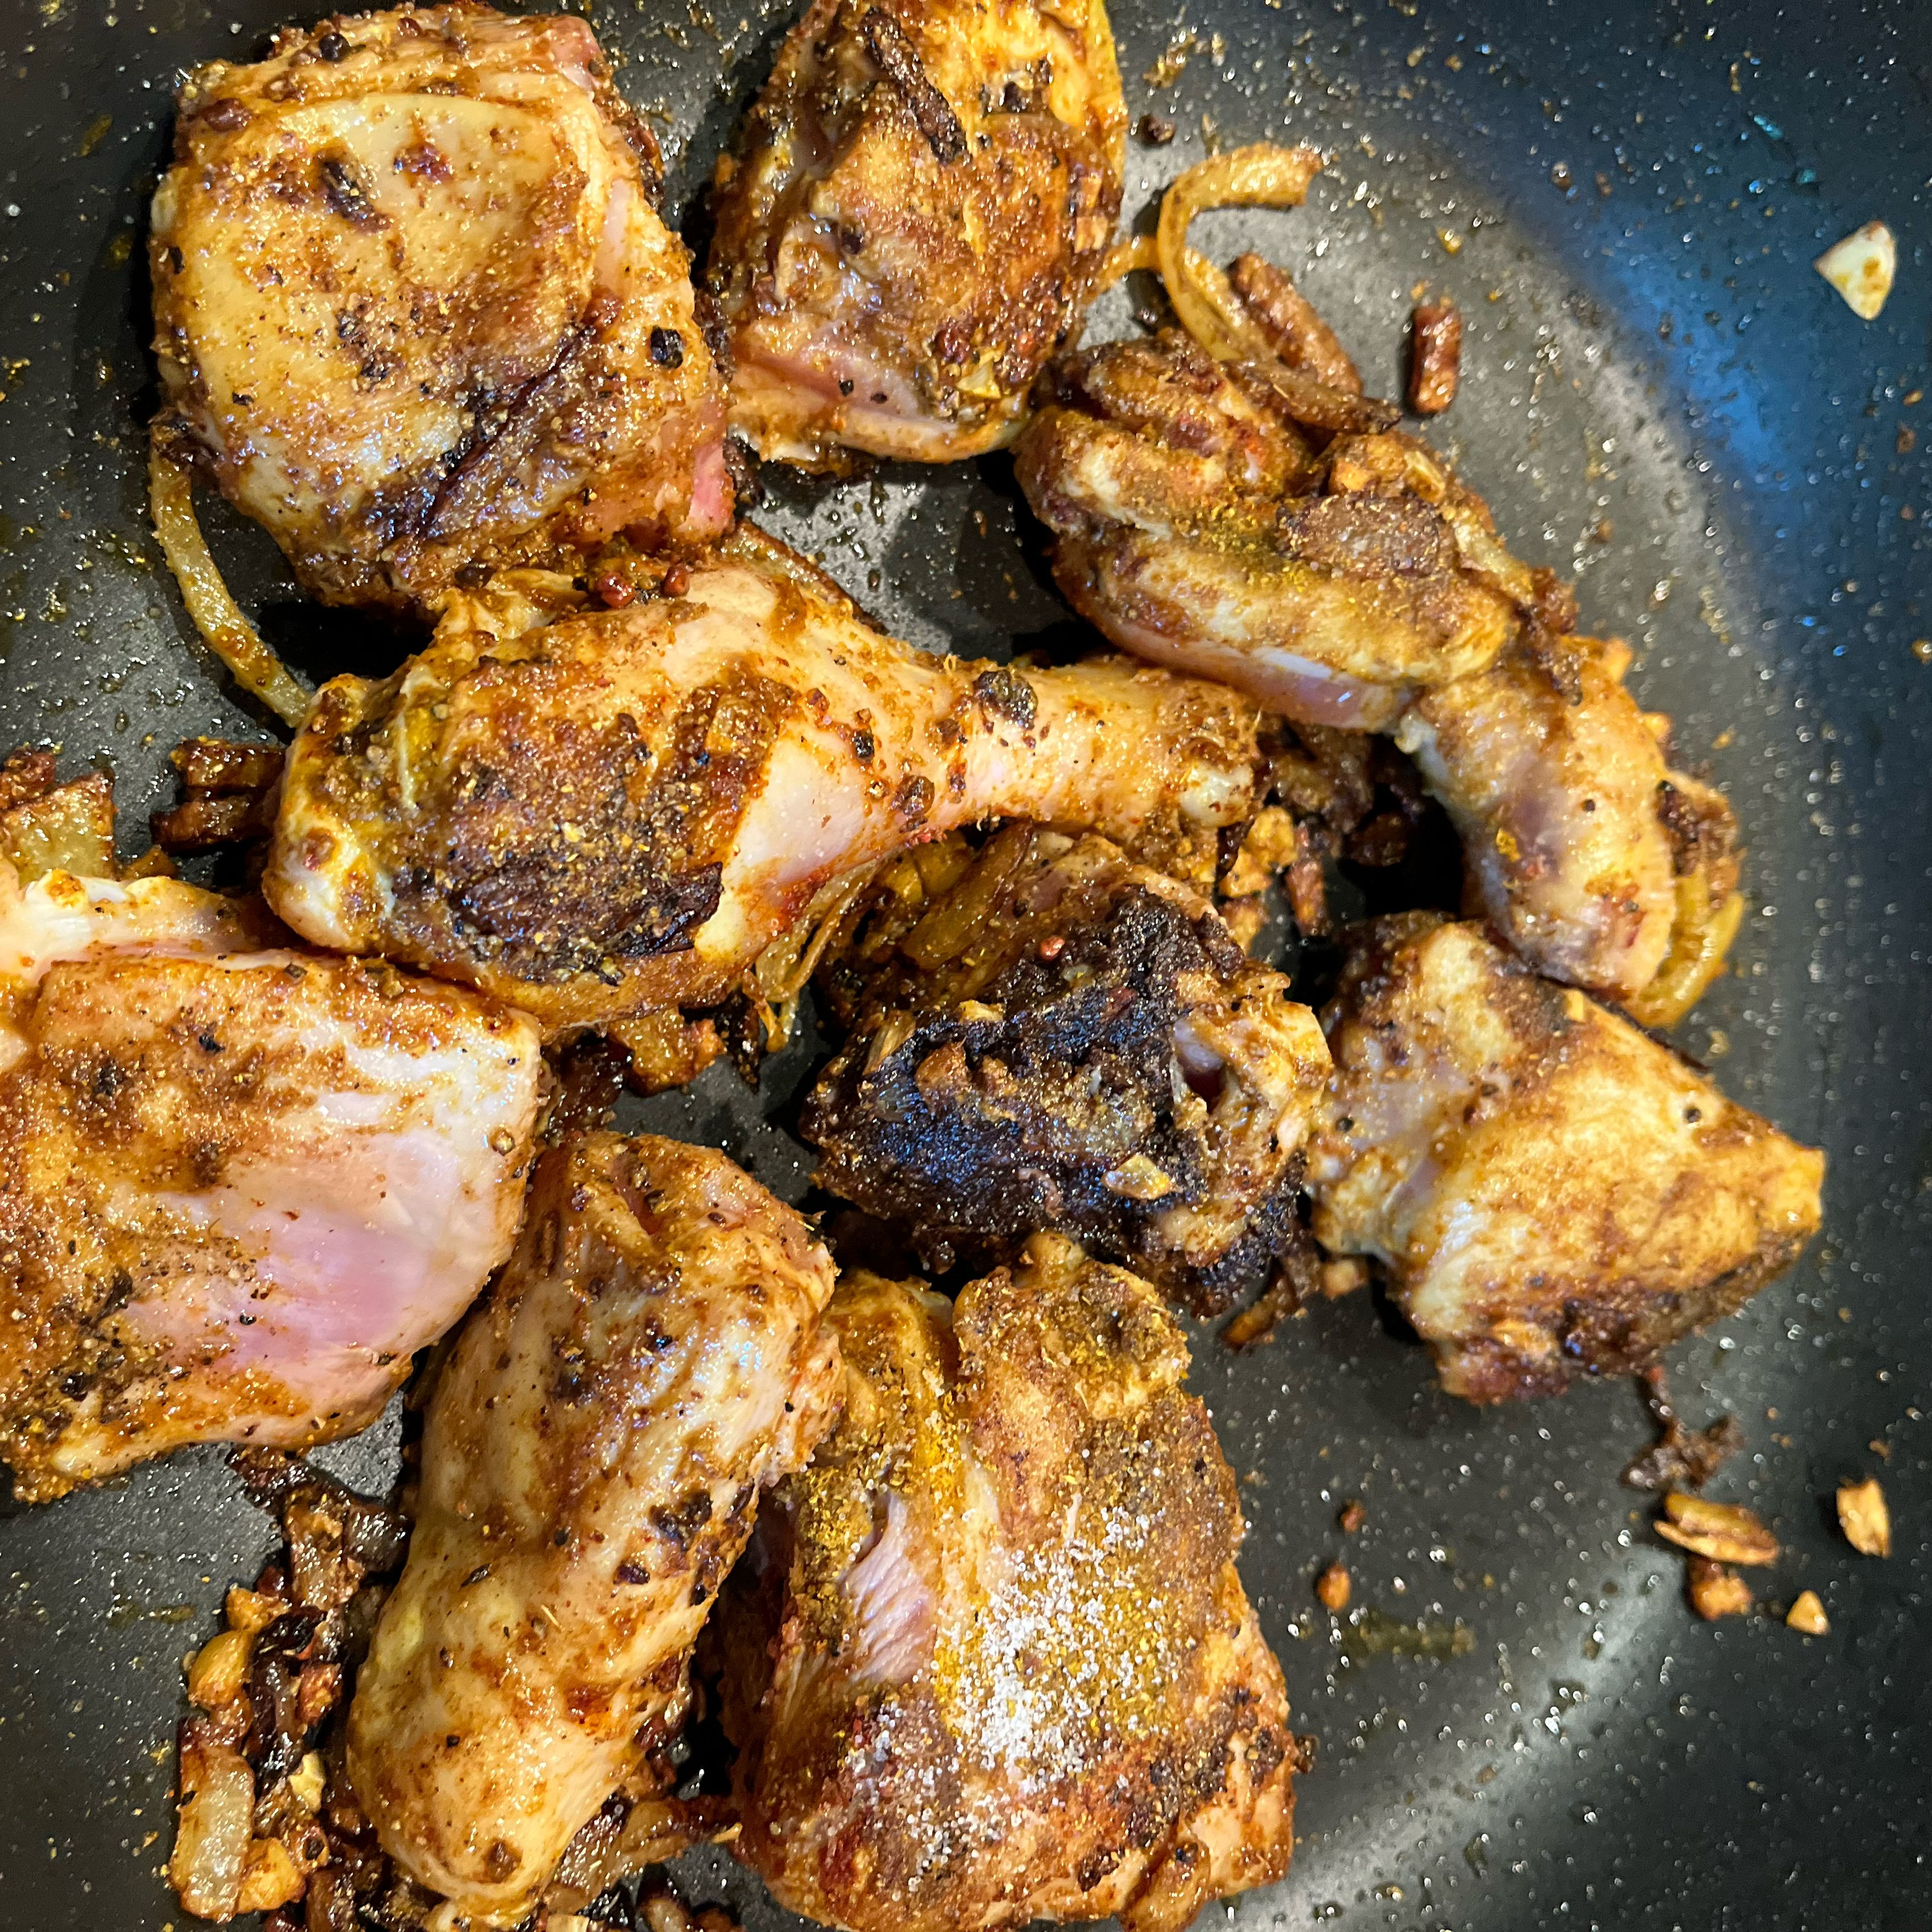 Add chicken pieces and fry until starting to brown. Add madras curry powder, pepper, cayenne pepper, salt and tamarind.  Stir and cook for a few minutes.